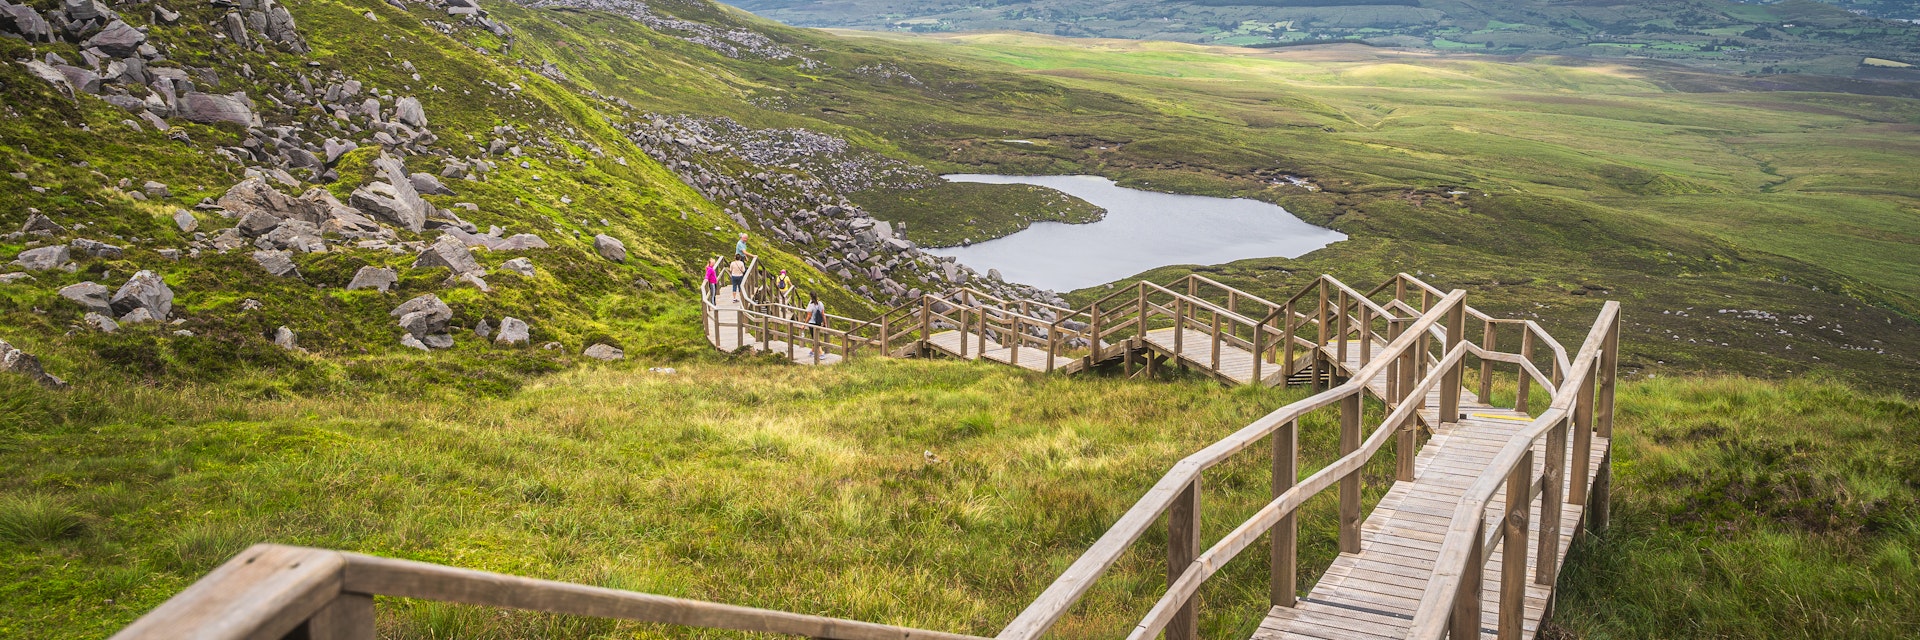 People enjoying a walk on steep stairs of wooden boardwalk in Cuilcagh Mountain Park with a view on lake and valley below, Northern Ireland